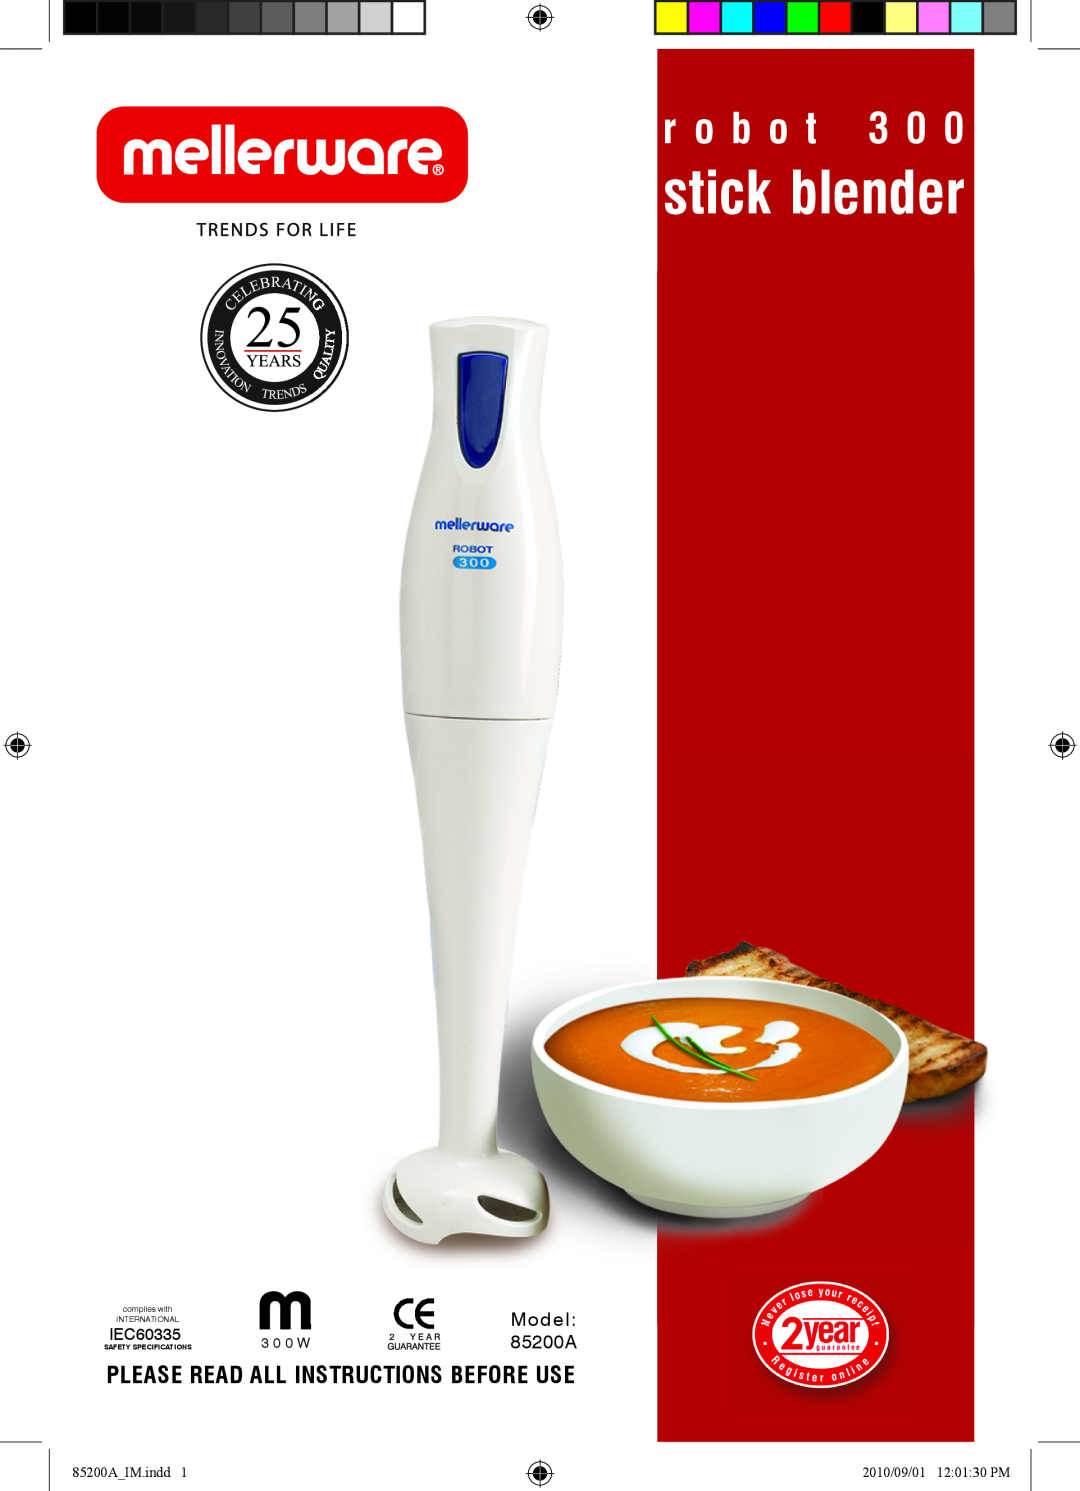 Mellerware 85200A specifications stick blender, r o b o t 3 0, Please Read All Instructions Before Use, IEC60335, 3 0 0 W 